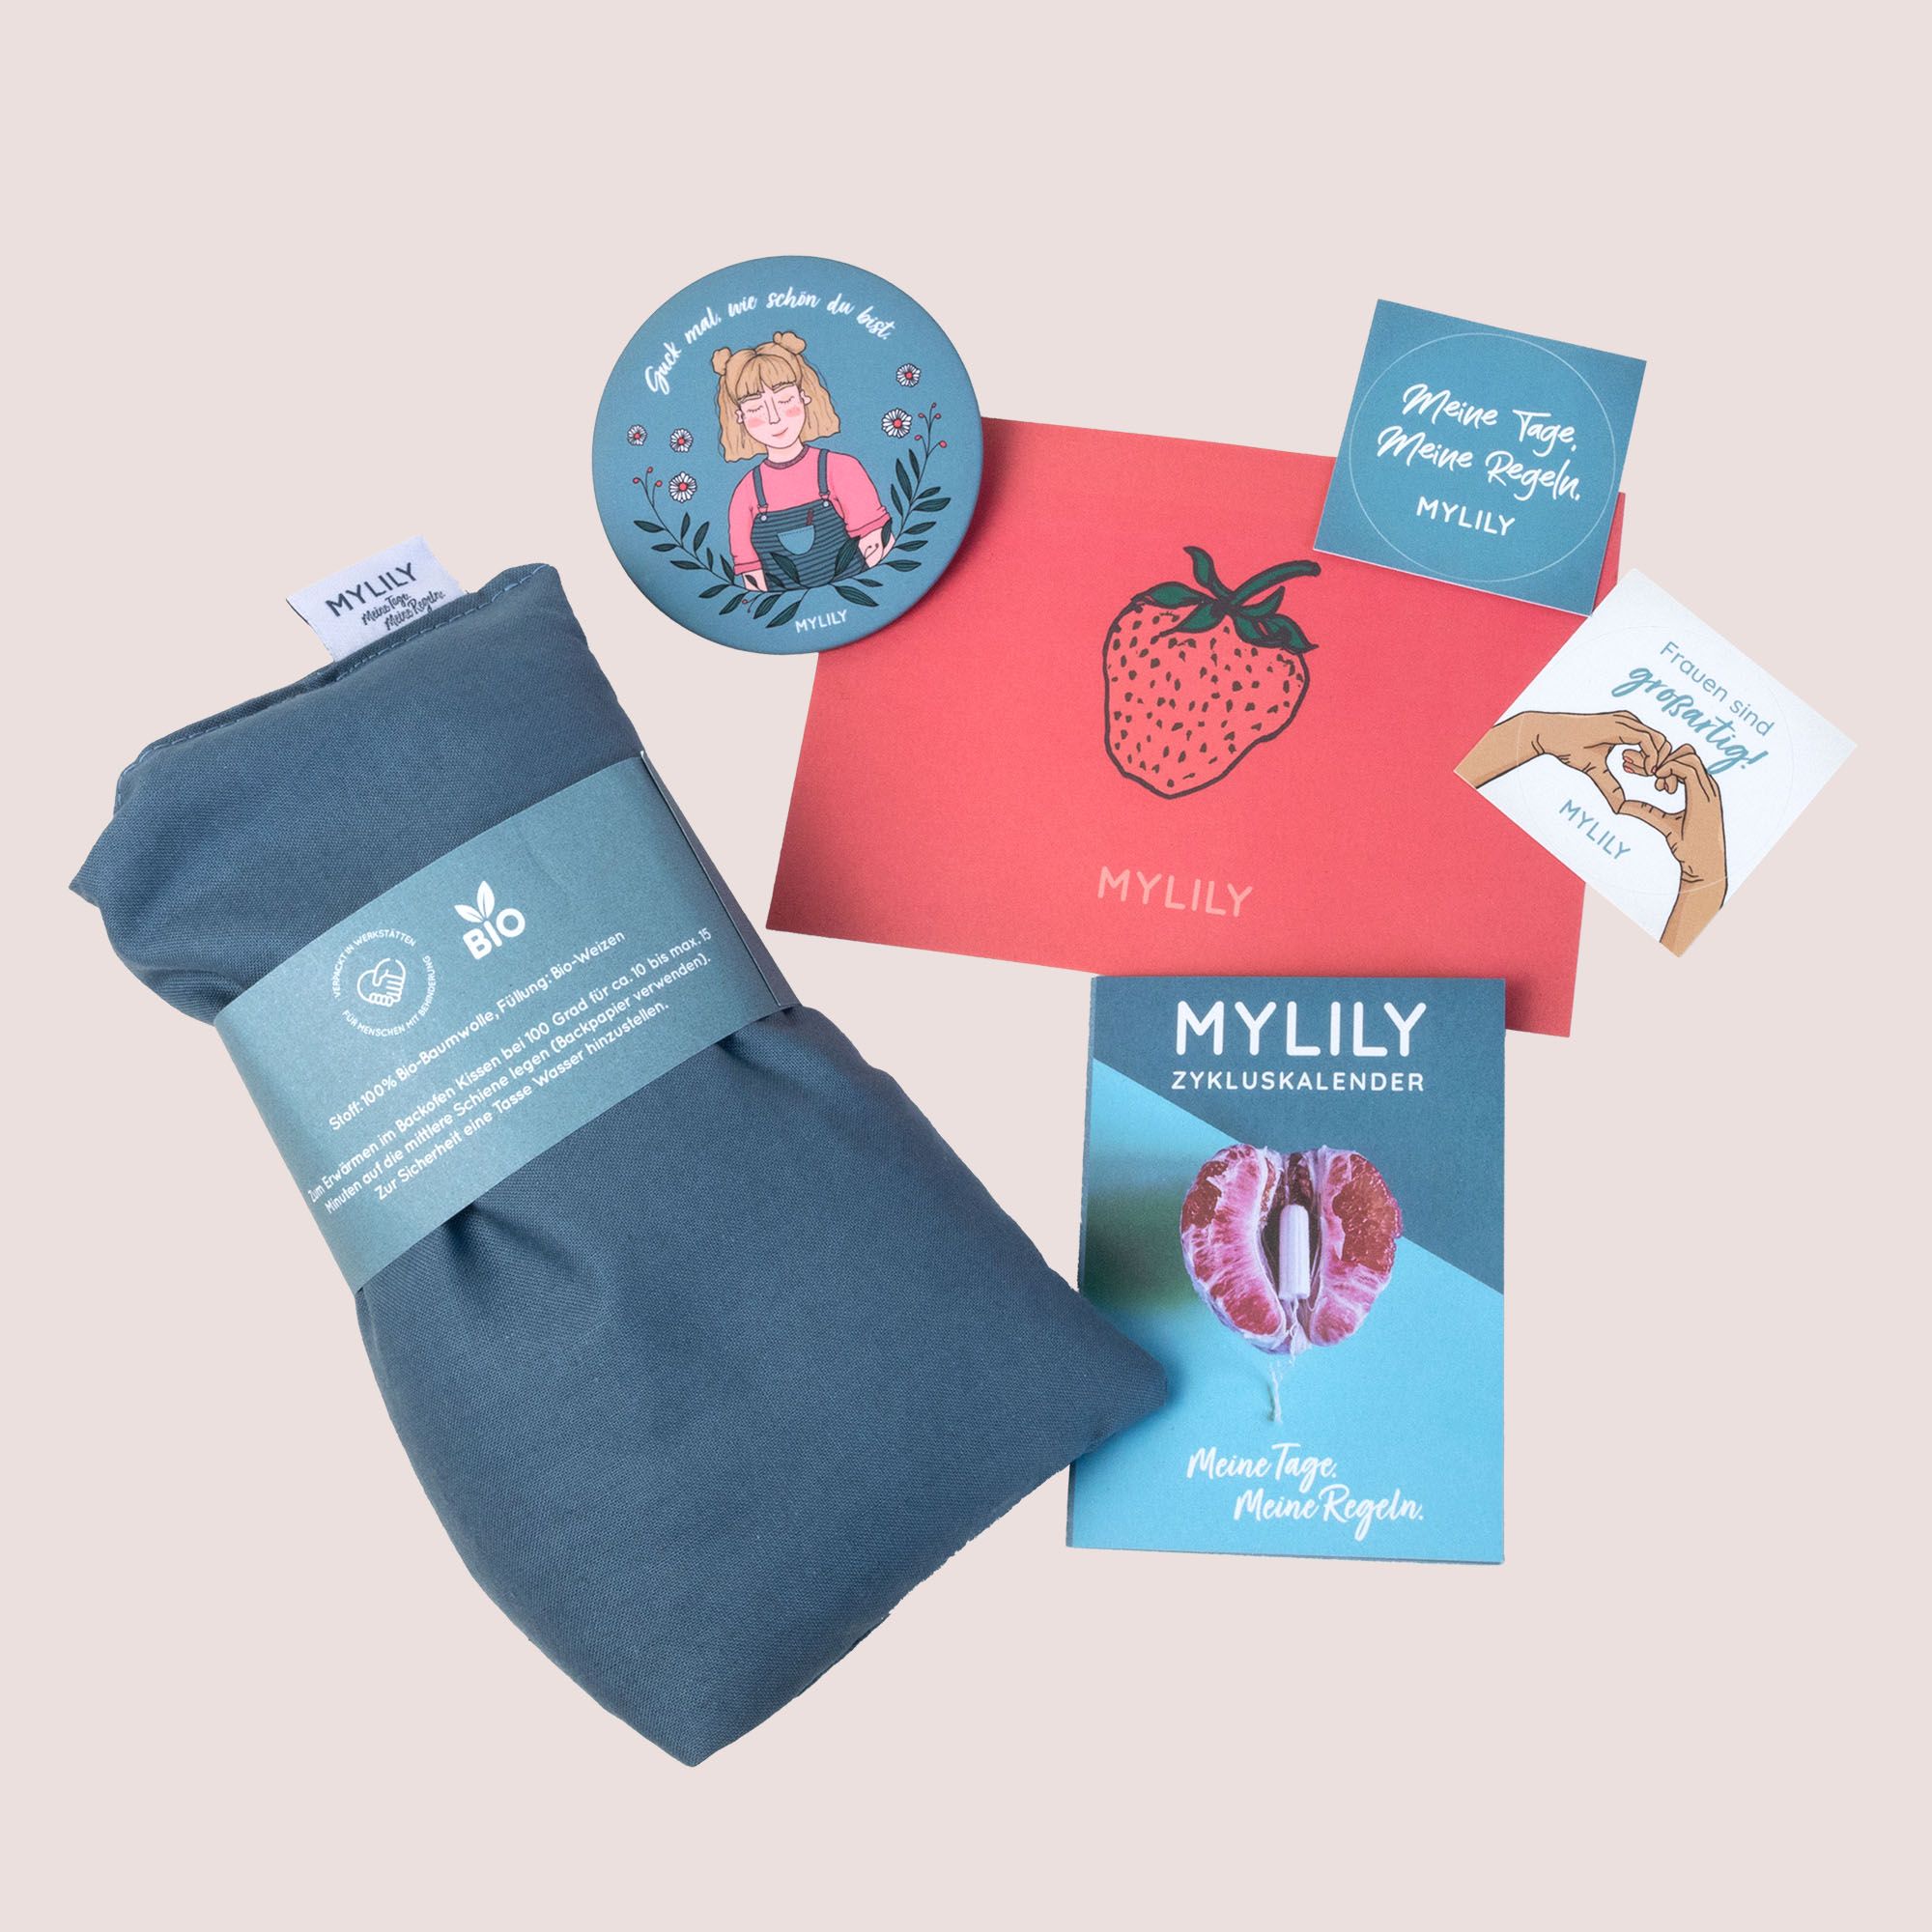 MYLILY First Period Kit | Erste Periode Set